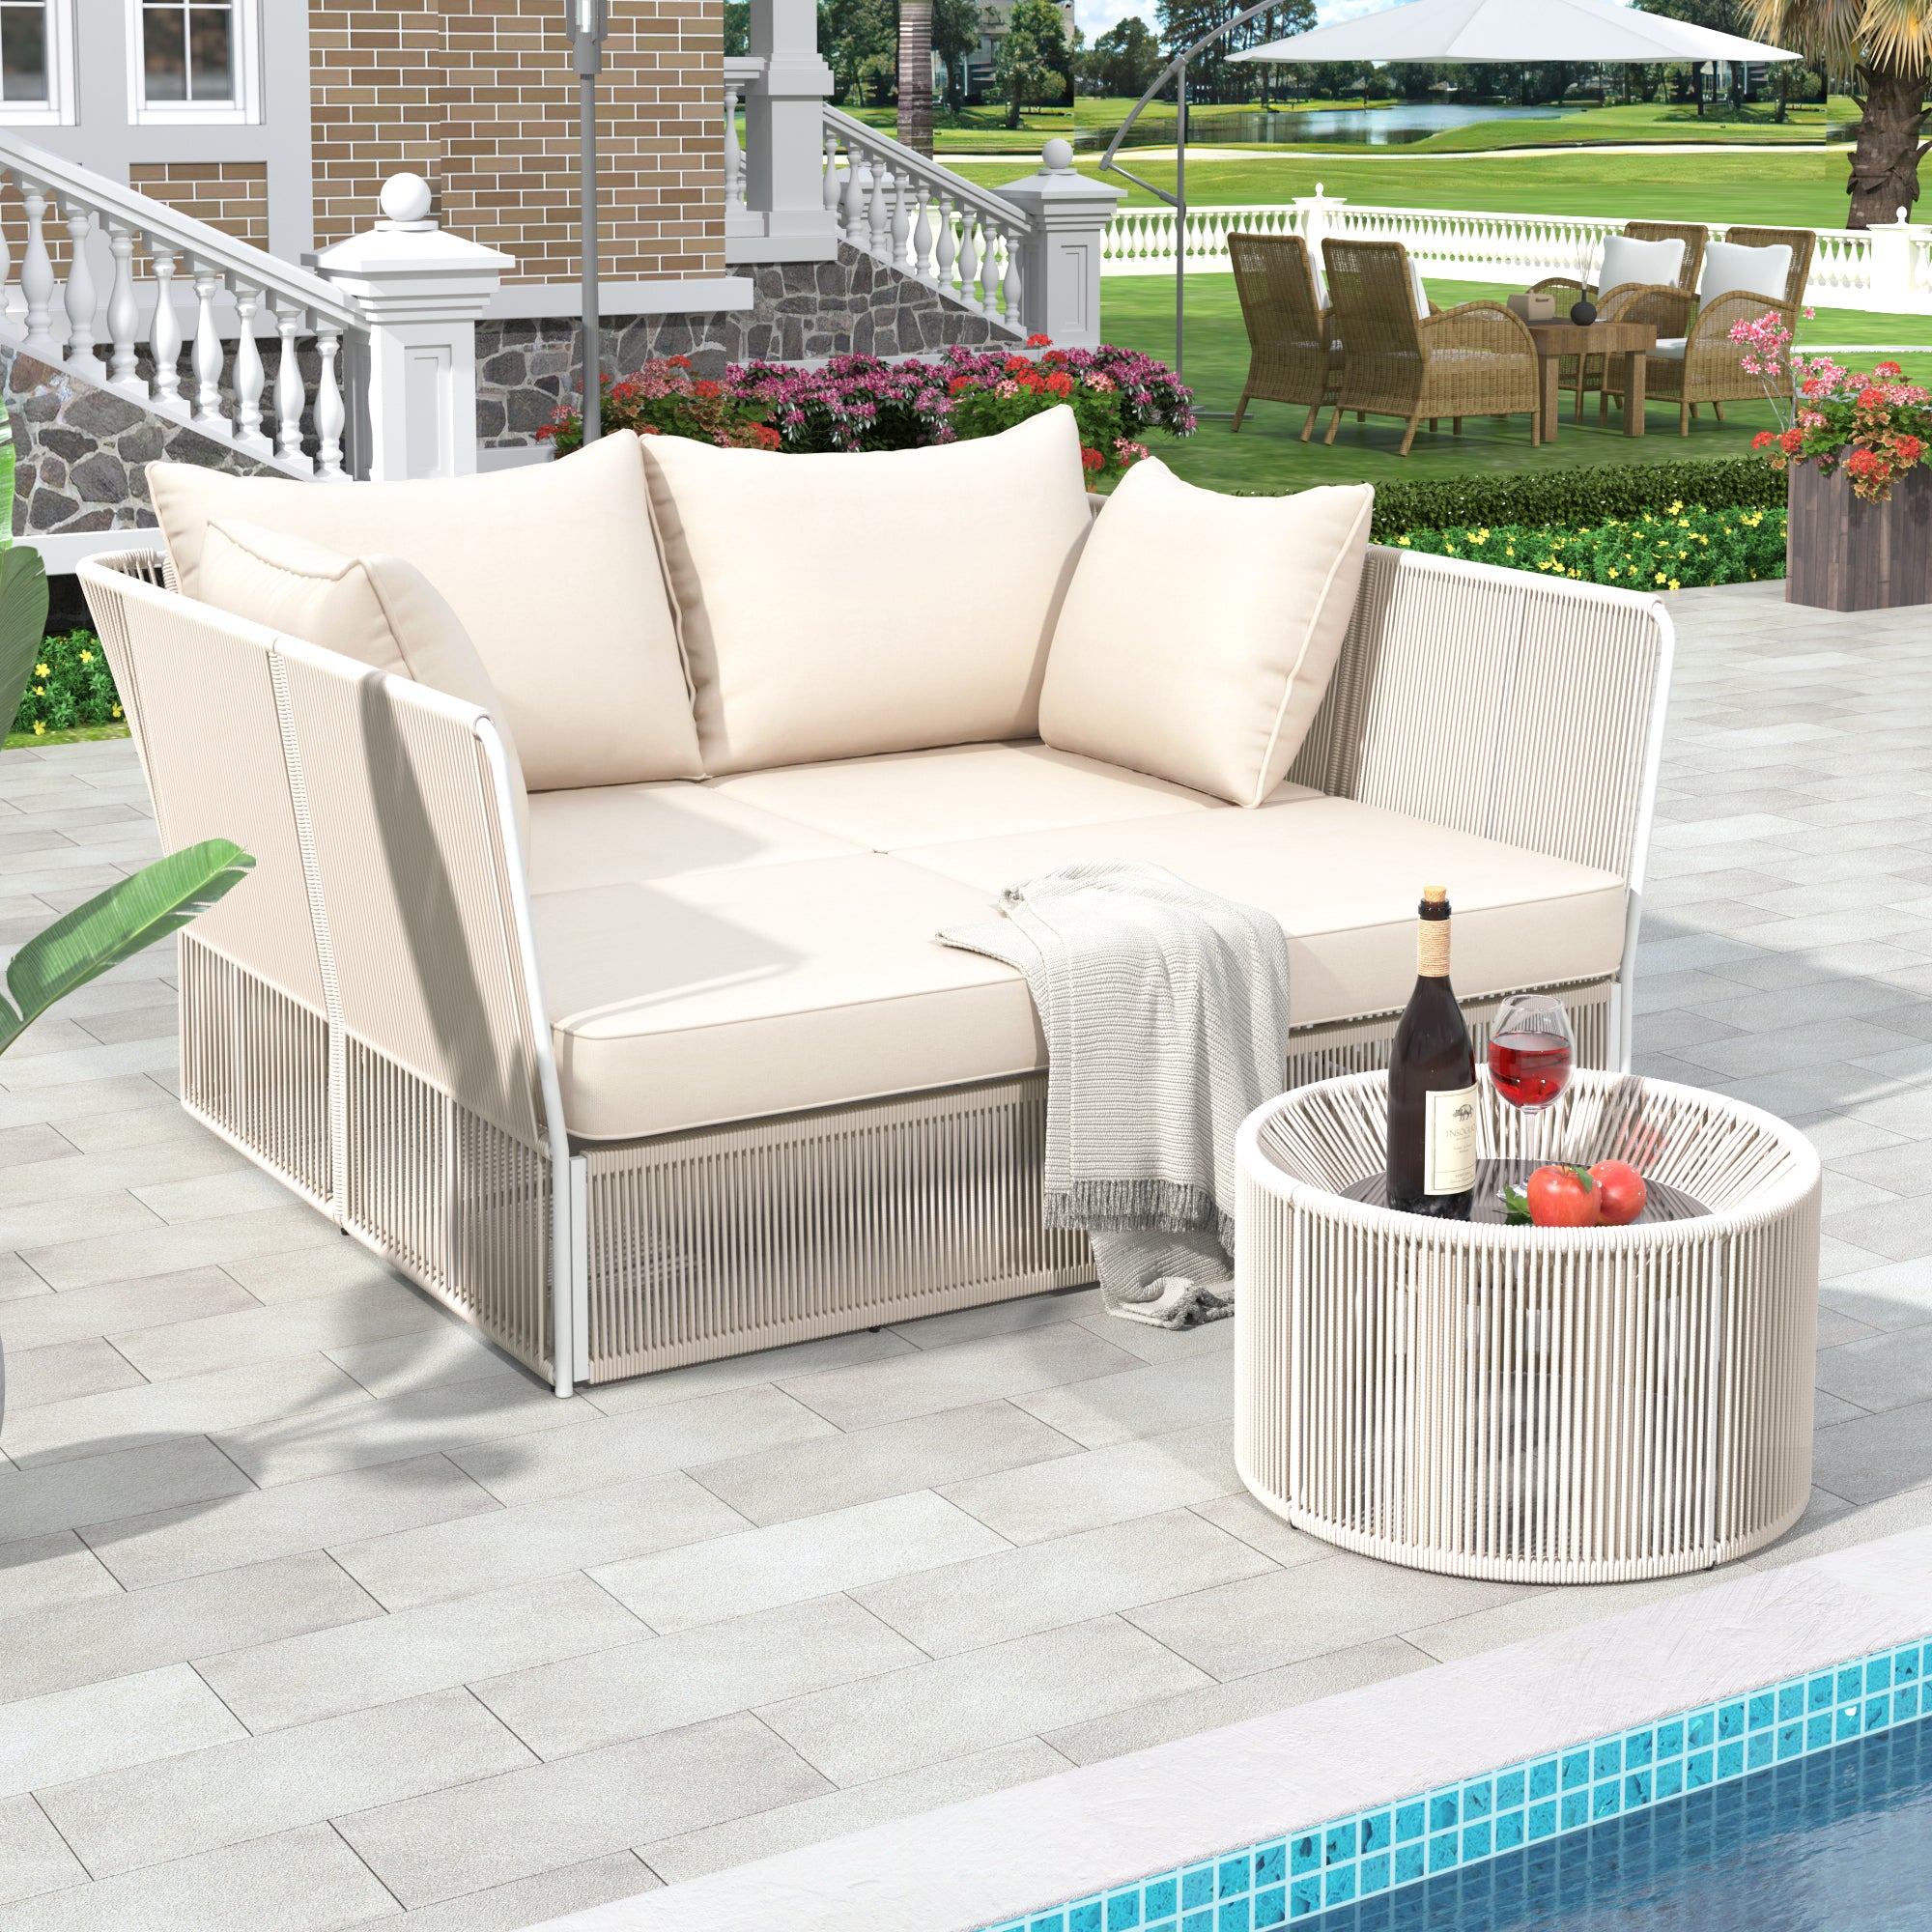 🆓🚛 2-Piece Outdoor Sunbed and Coffee Table Set, Patio Double Chaise Lounger Loveseat Daybed With Clear Tempered Glass Table for The Patio, Poolside (Beige Cushion + Natural Rope)